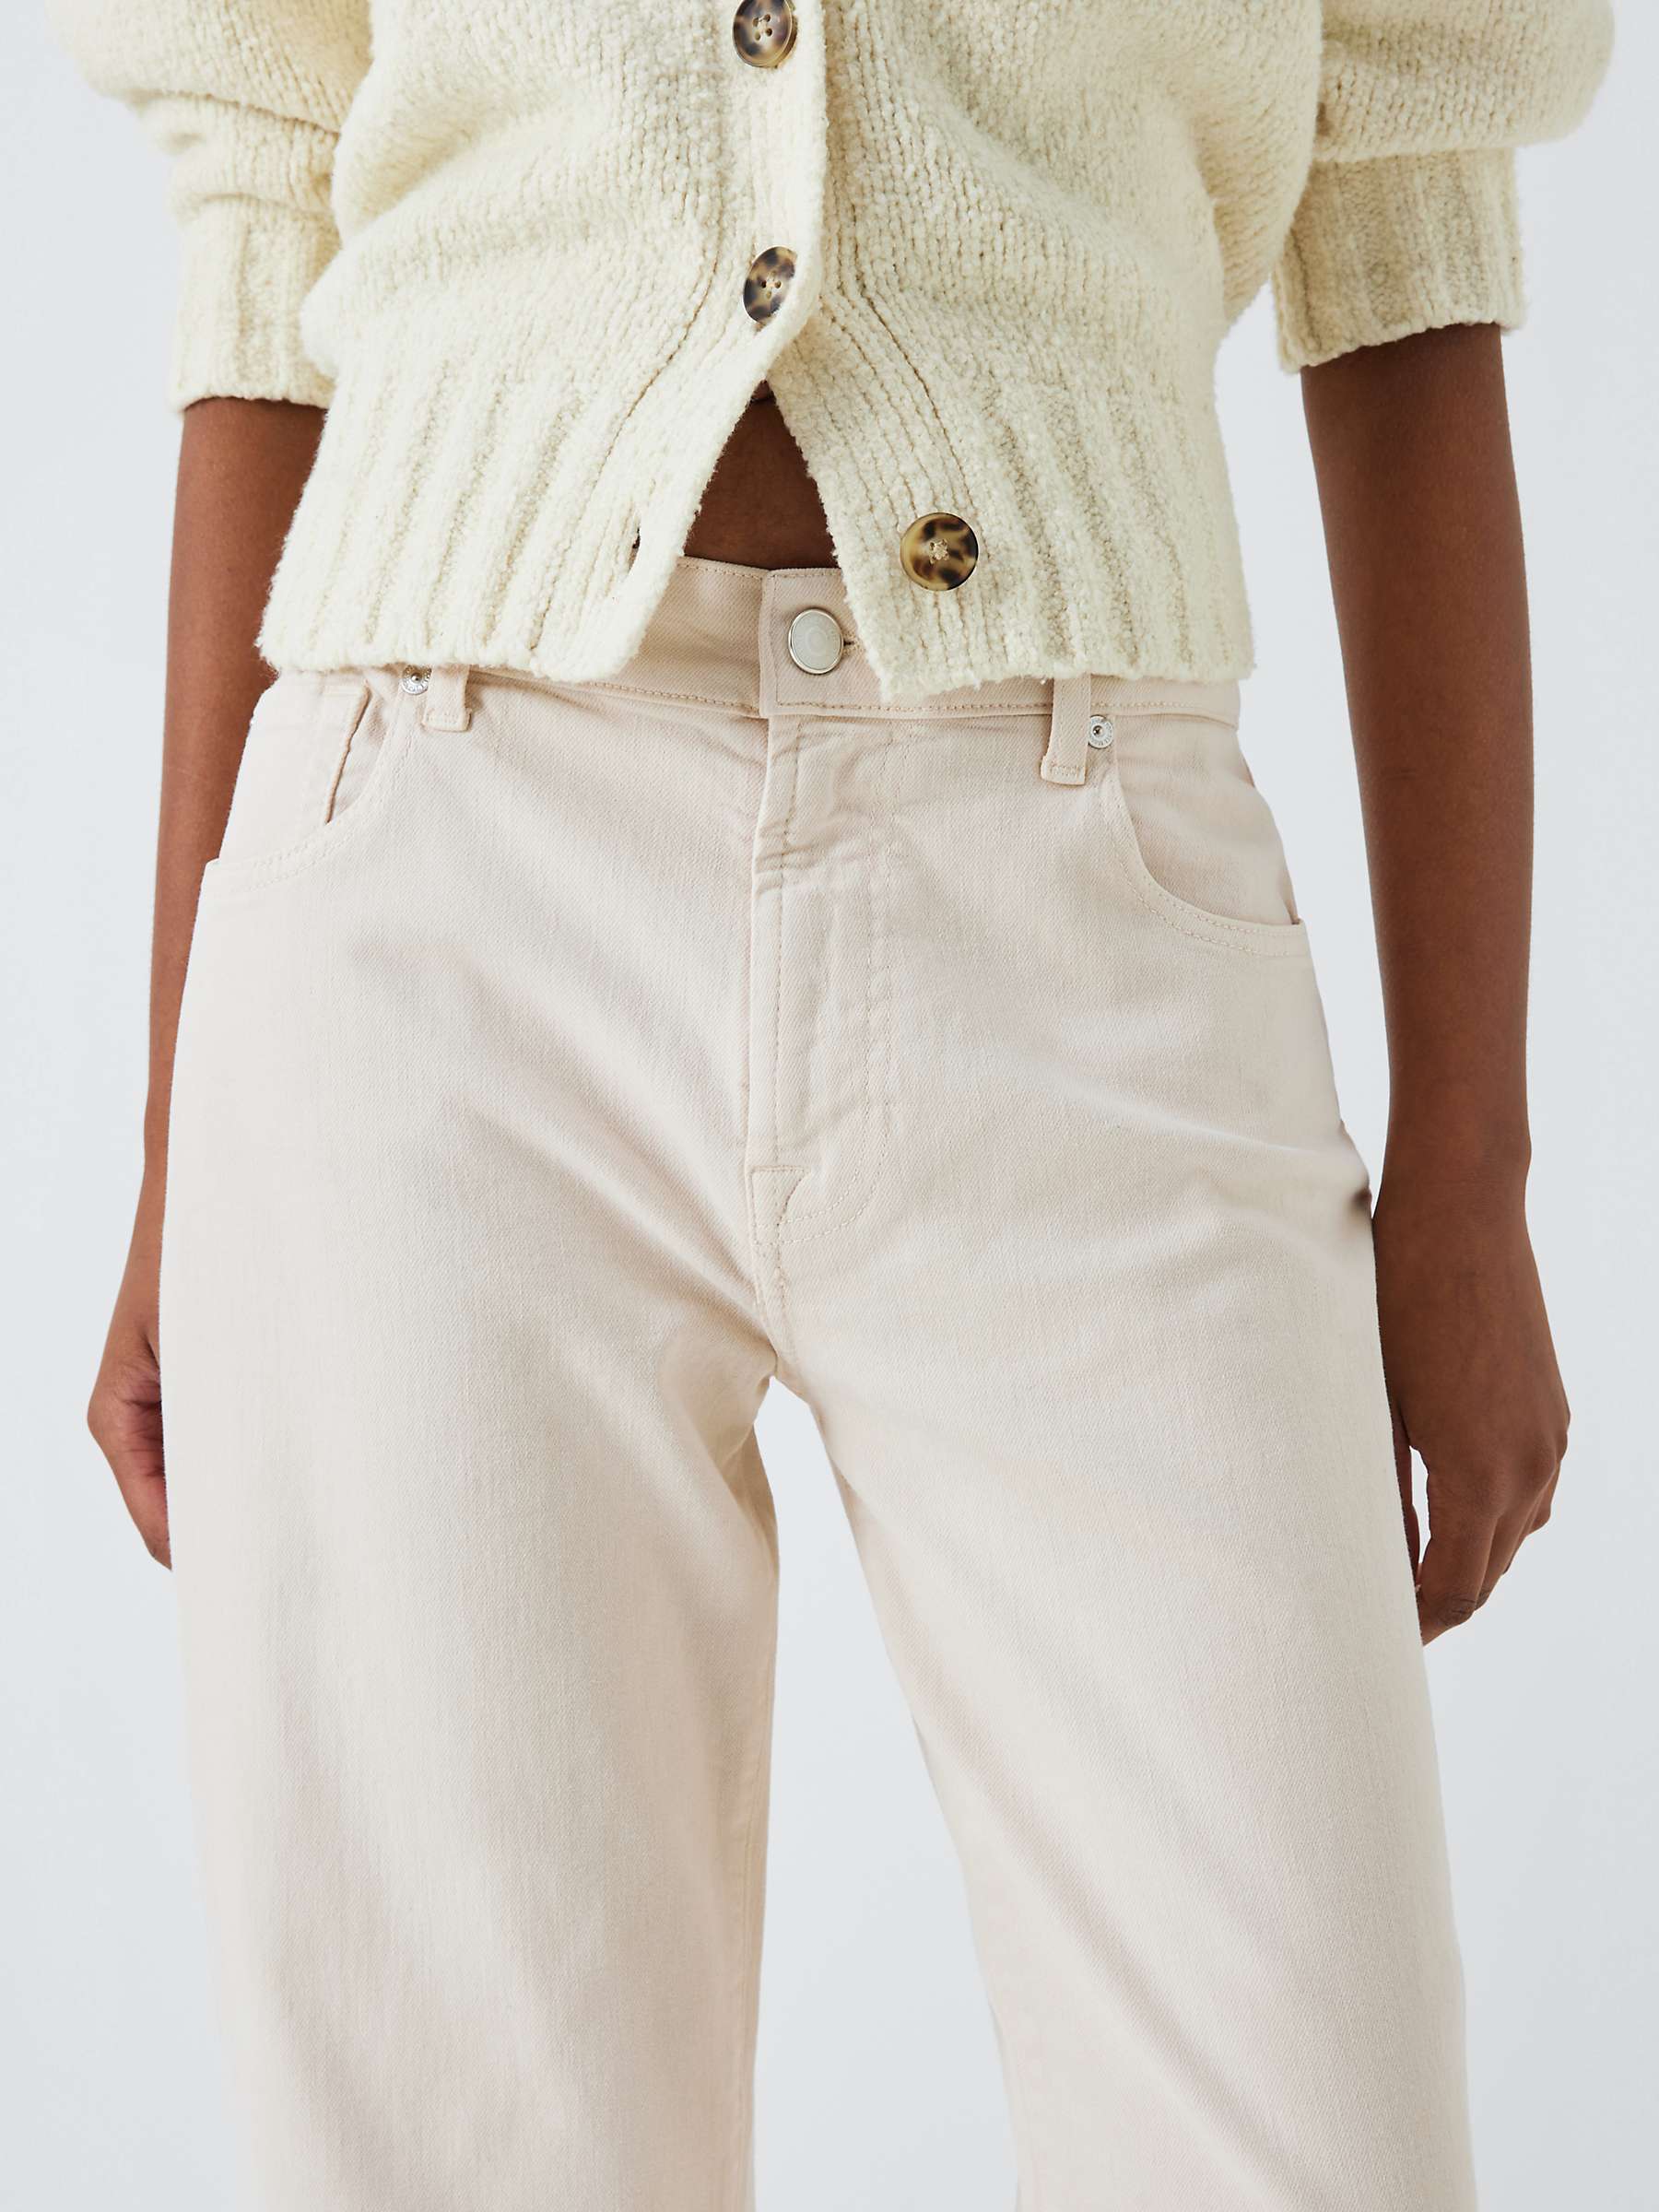 Buy 7 For All Mankind Ellie Mid Rise Straight Leg Jeans, Off White Online at johnlewis.com